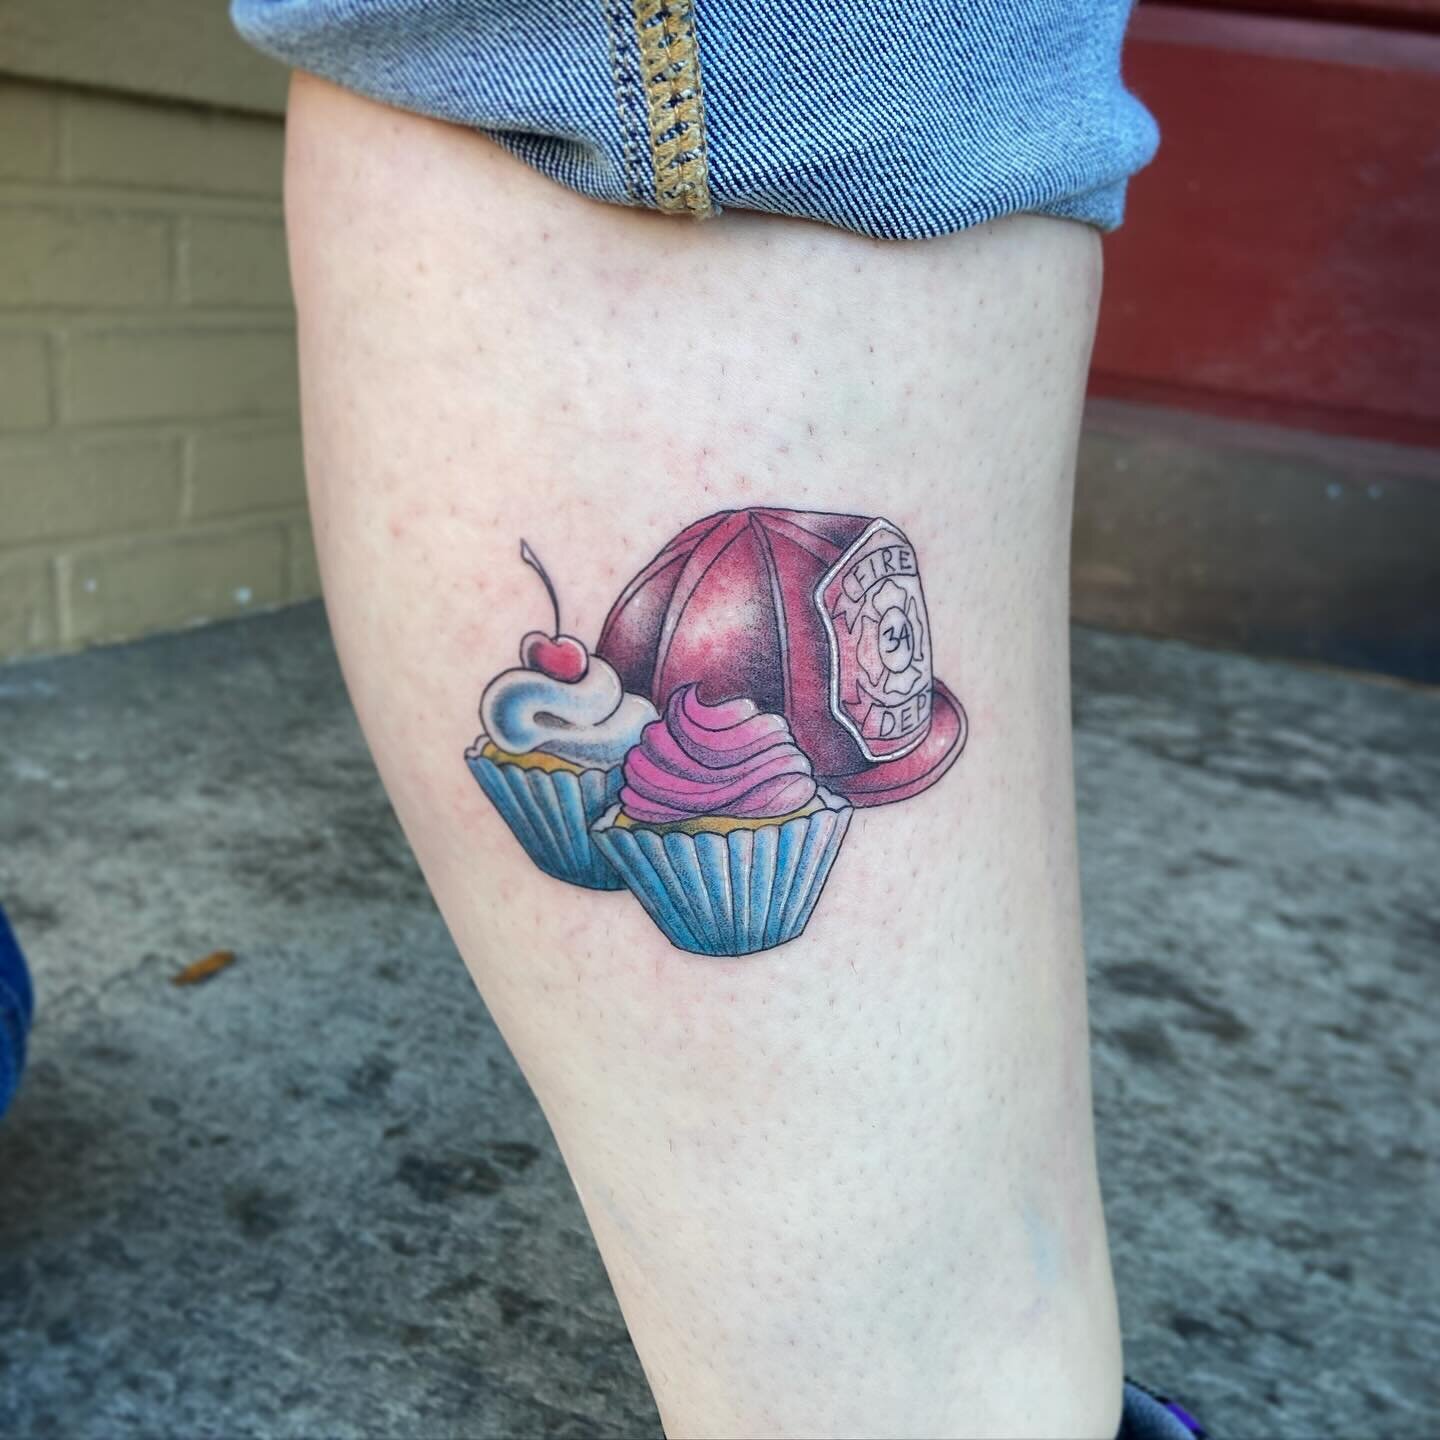 Good enough to eat 🧁 by @averyblacktattoo 
.
.
.
#cupcake #cupcaketattoo #cutetattoo #foodtattoo #colortattoo #cttattoo #cttattooshop